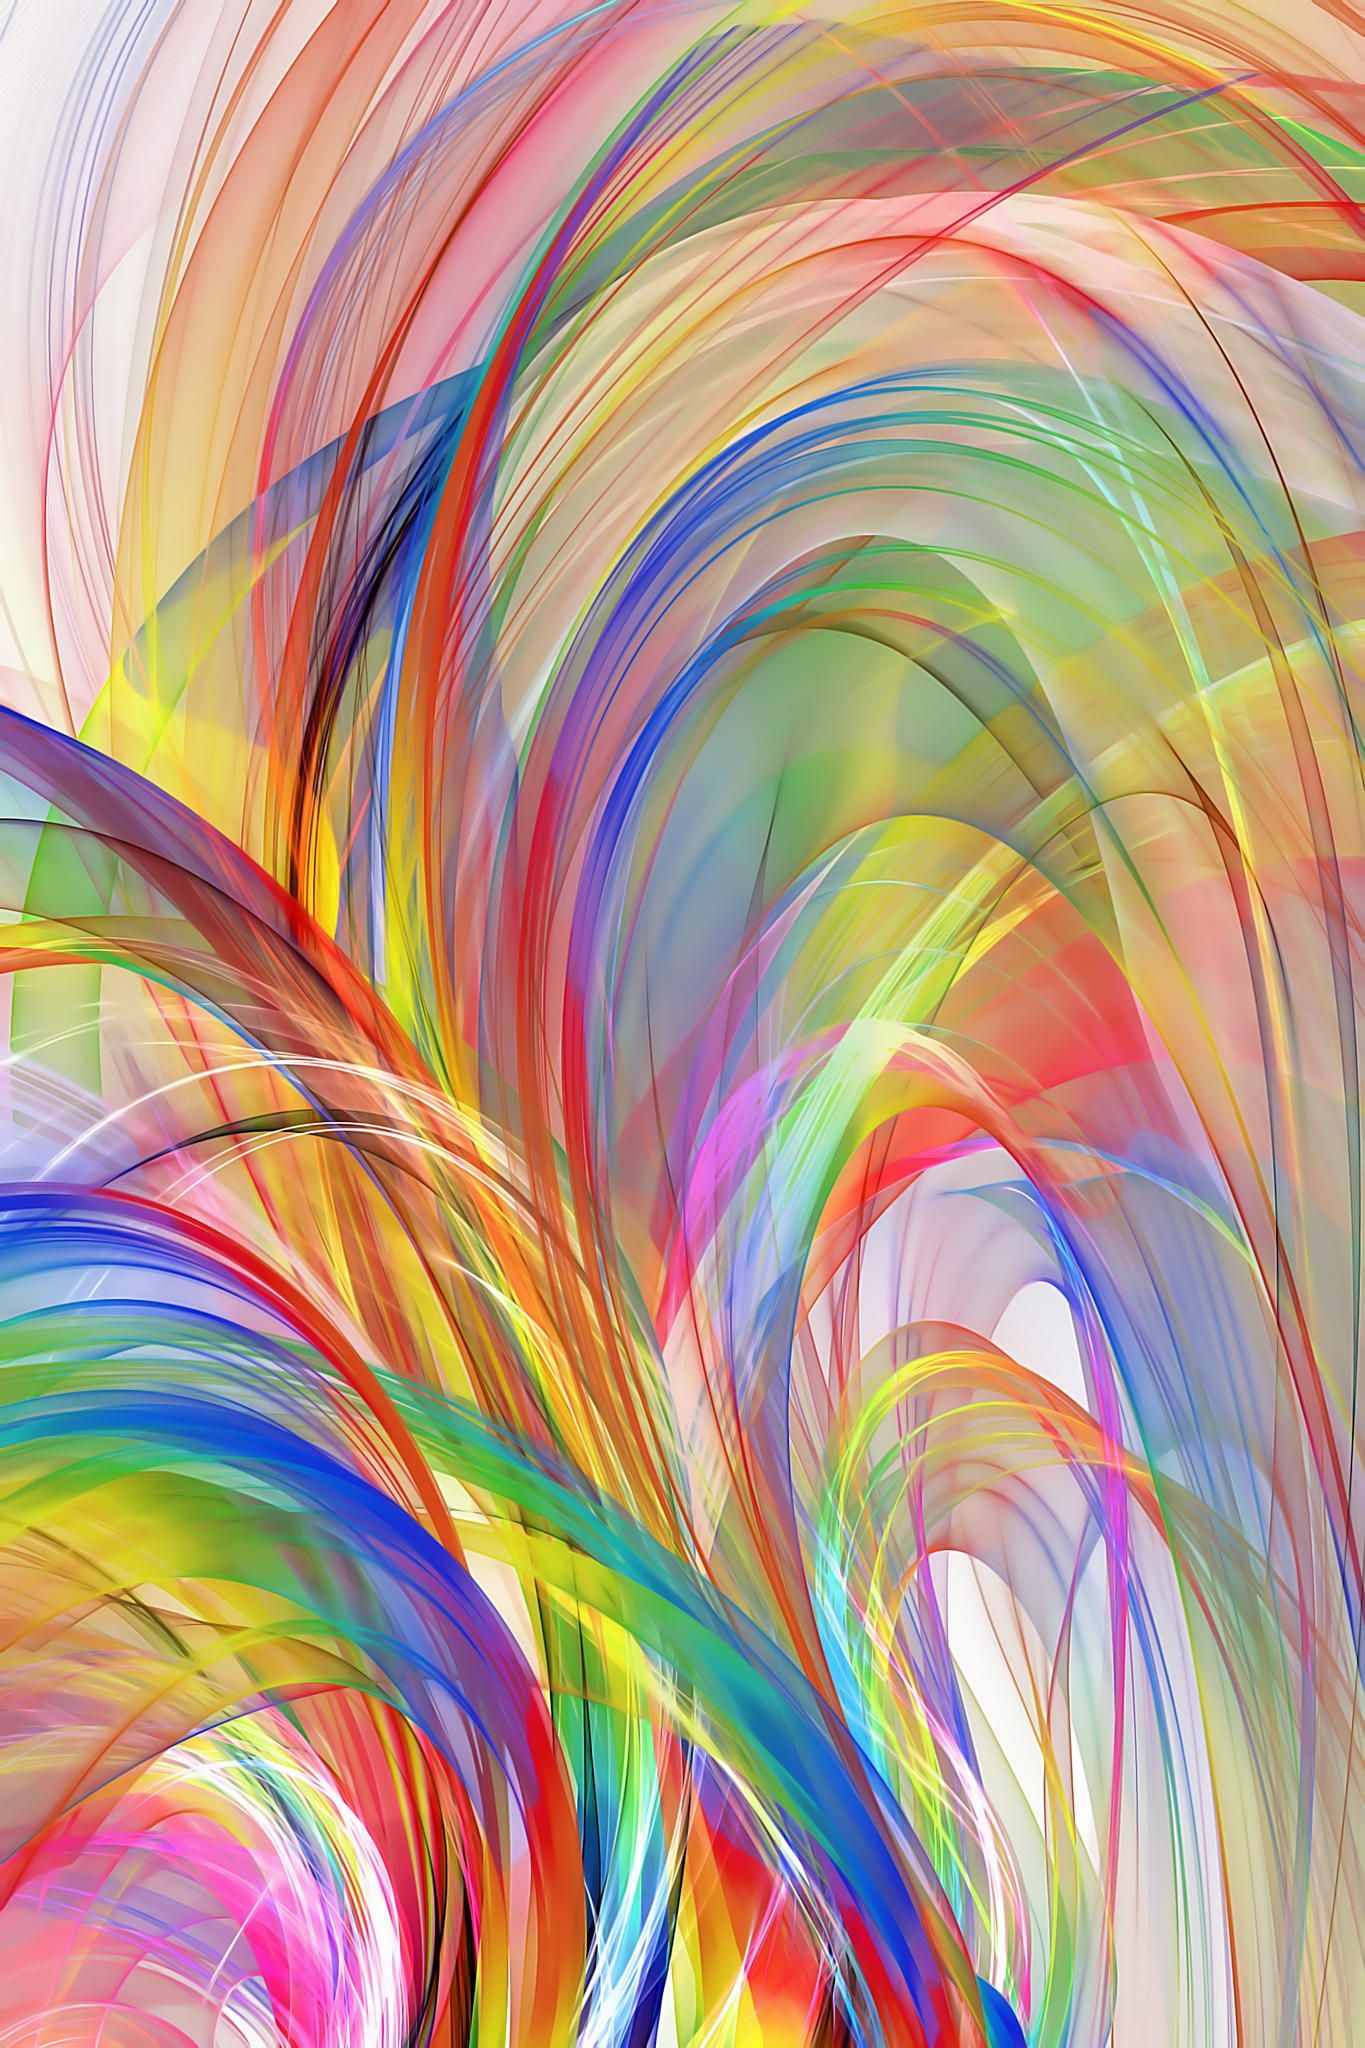 Abstract Colorful Background By Alex On 500px Image